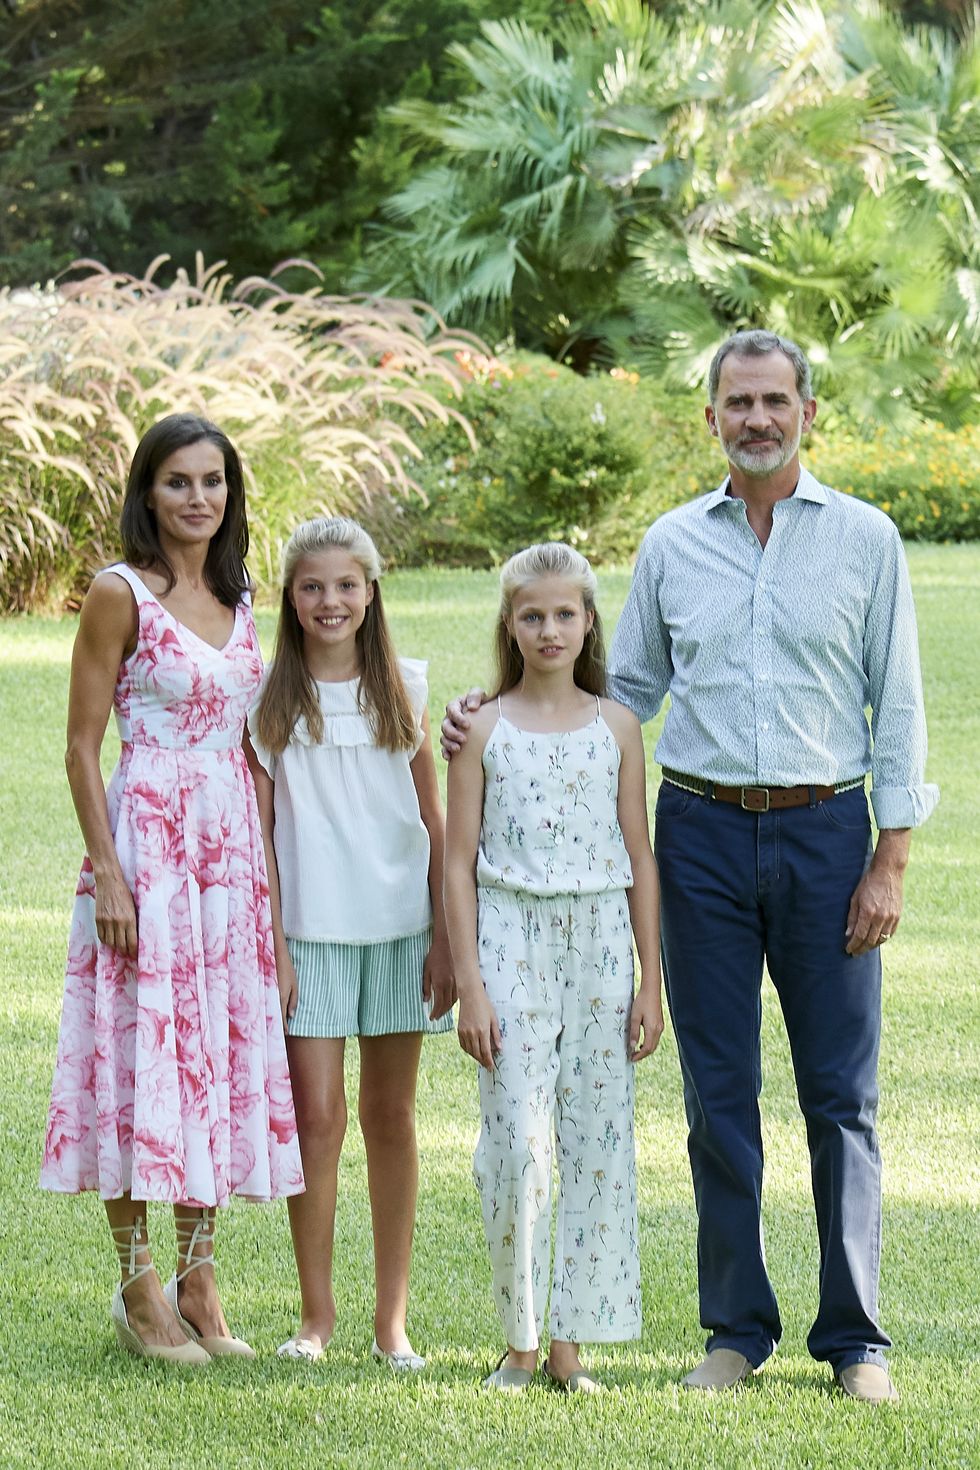 The Spanish Royal Family's Trip to Mallorca in Photos 2019